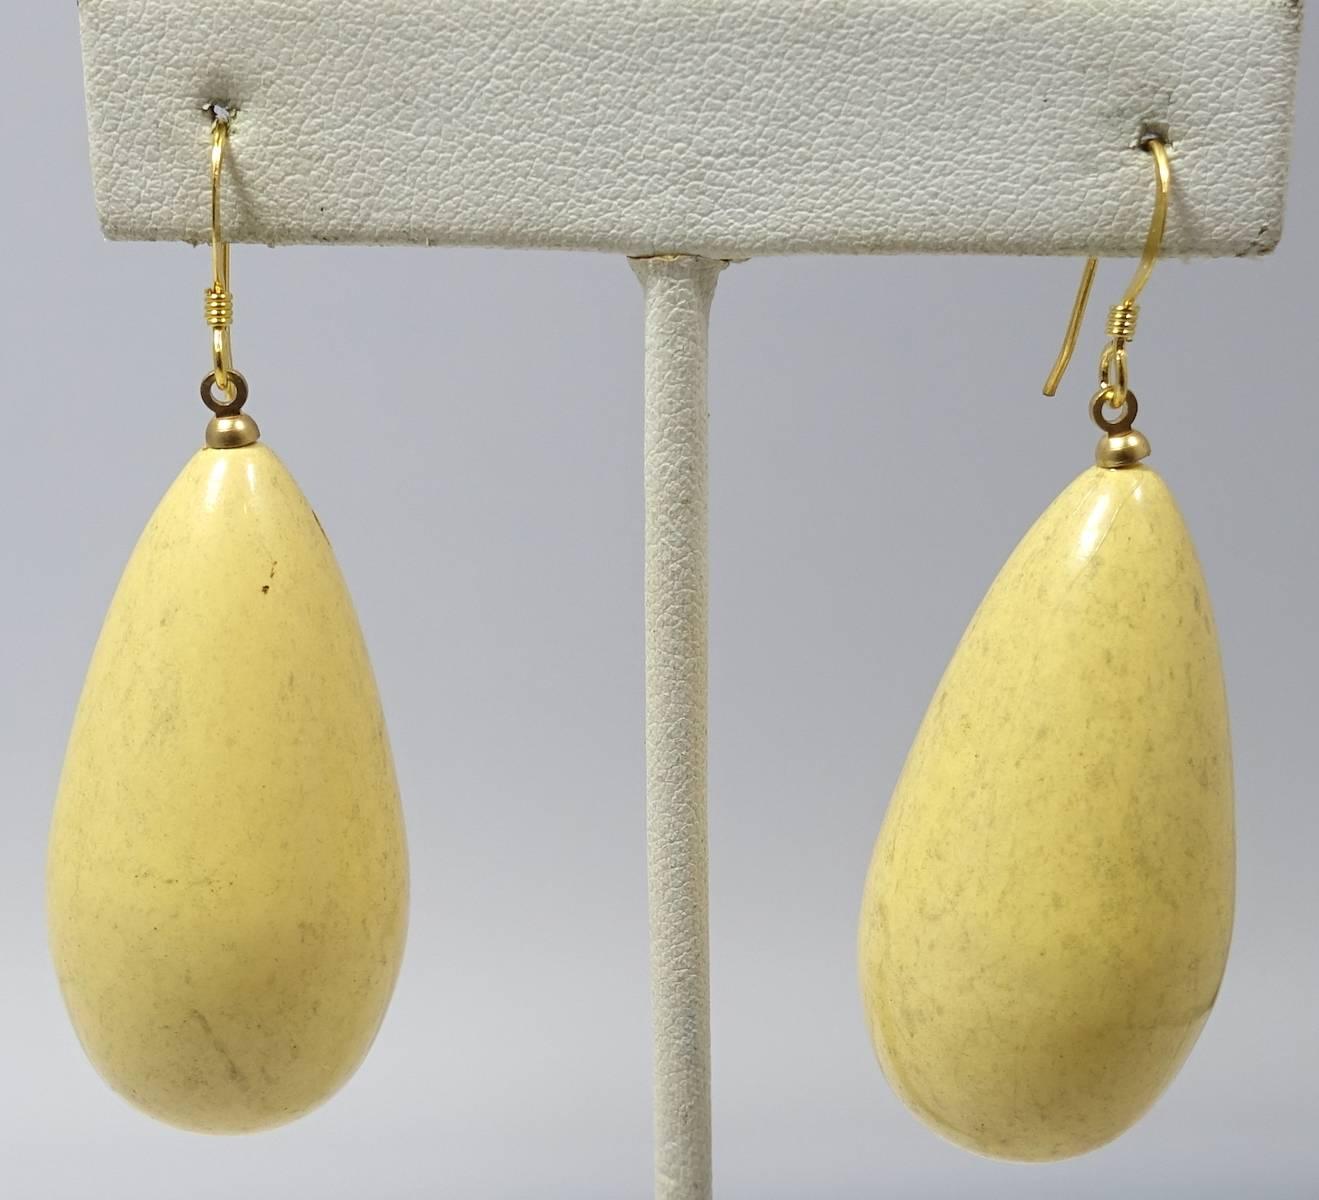 These Kenneth Jay Lane pierced earrings feature a teardrop design in a yellow marbleized natural wood and gold tone setting.  These earrings measure 2” x 1” and are in excellent condition.